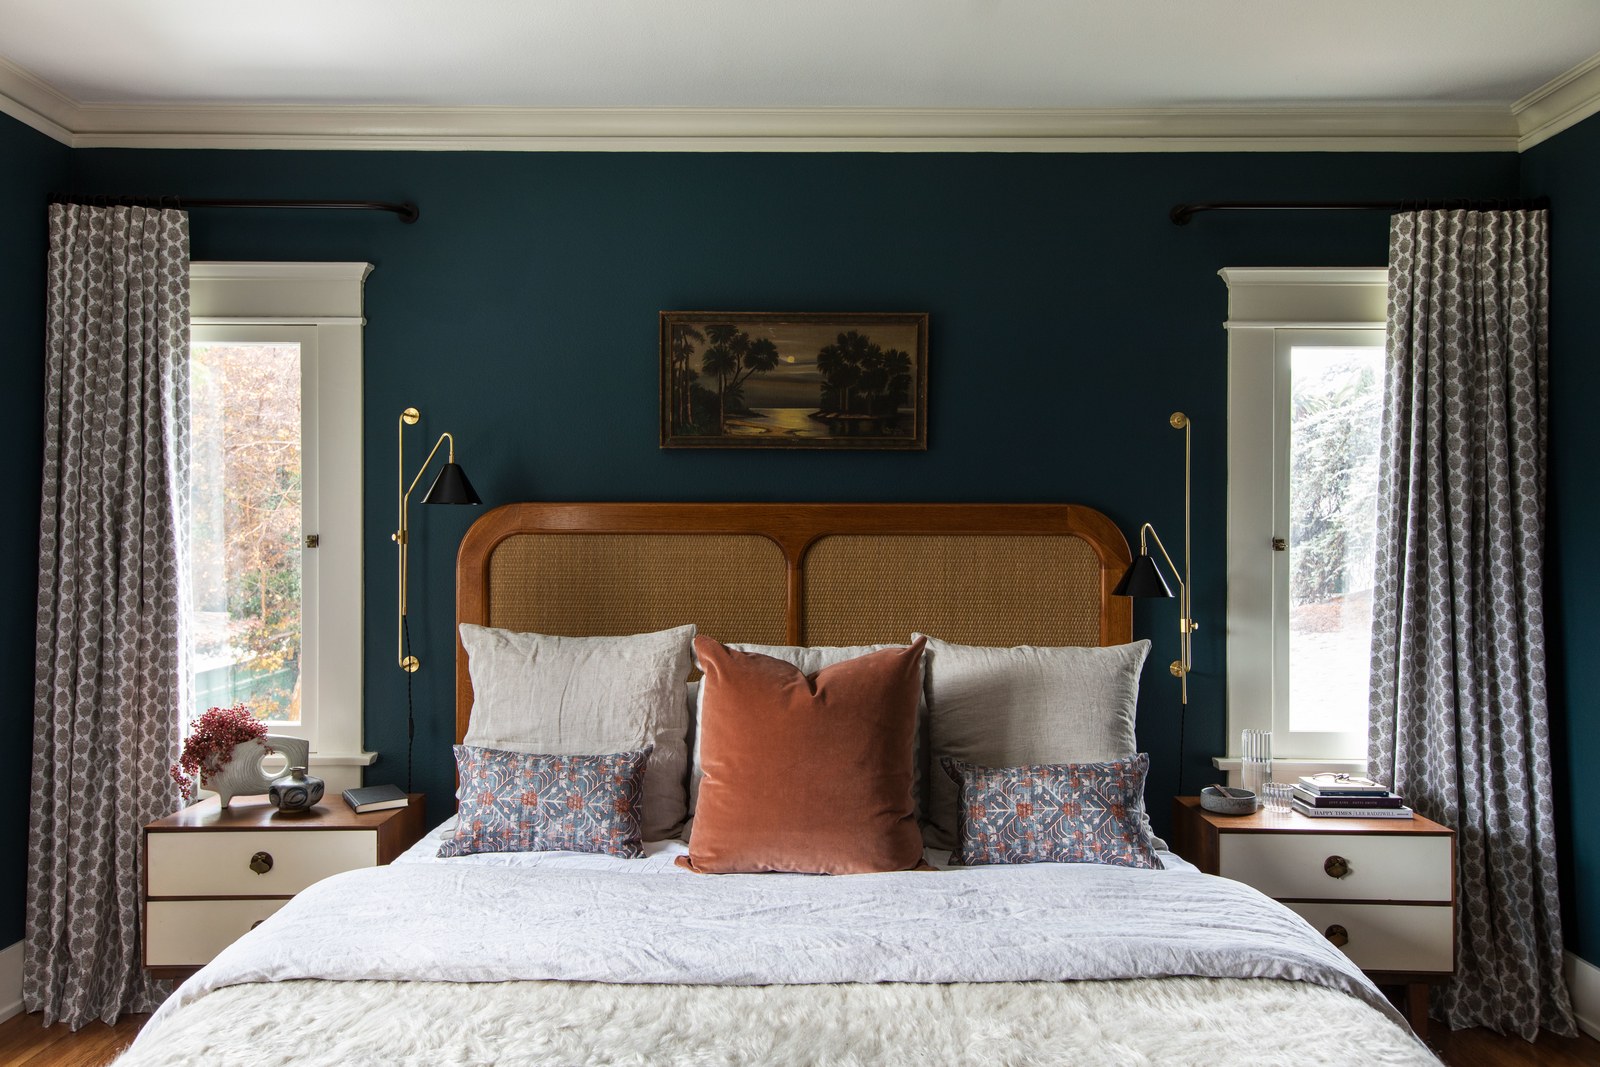 midcentury bed and dark blue teal paint in the bedroom | modern historic craftsman house tour jacey duprie